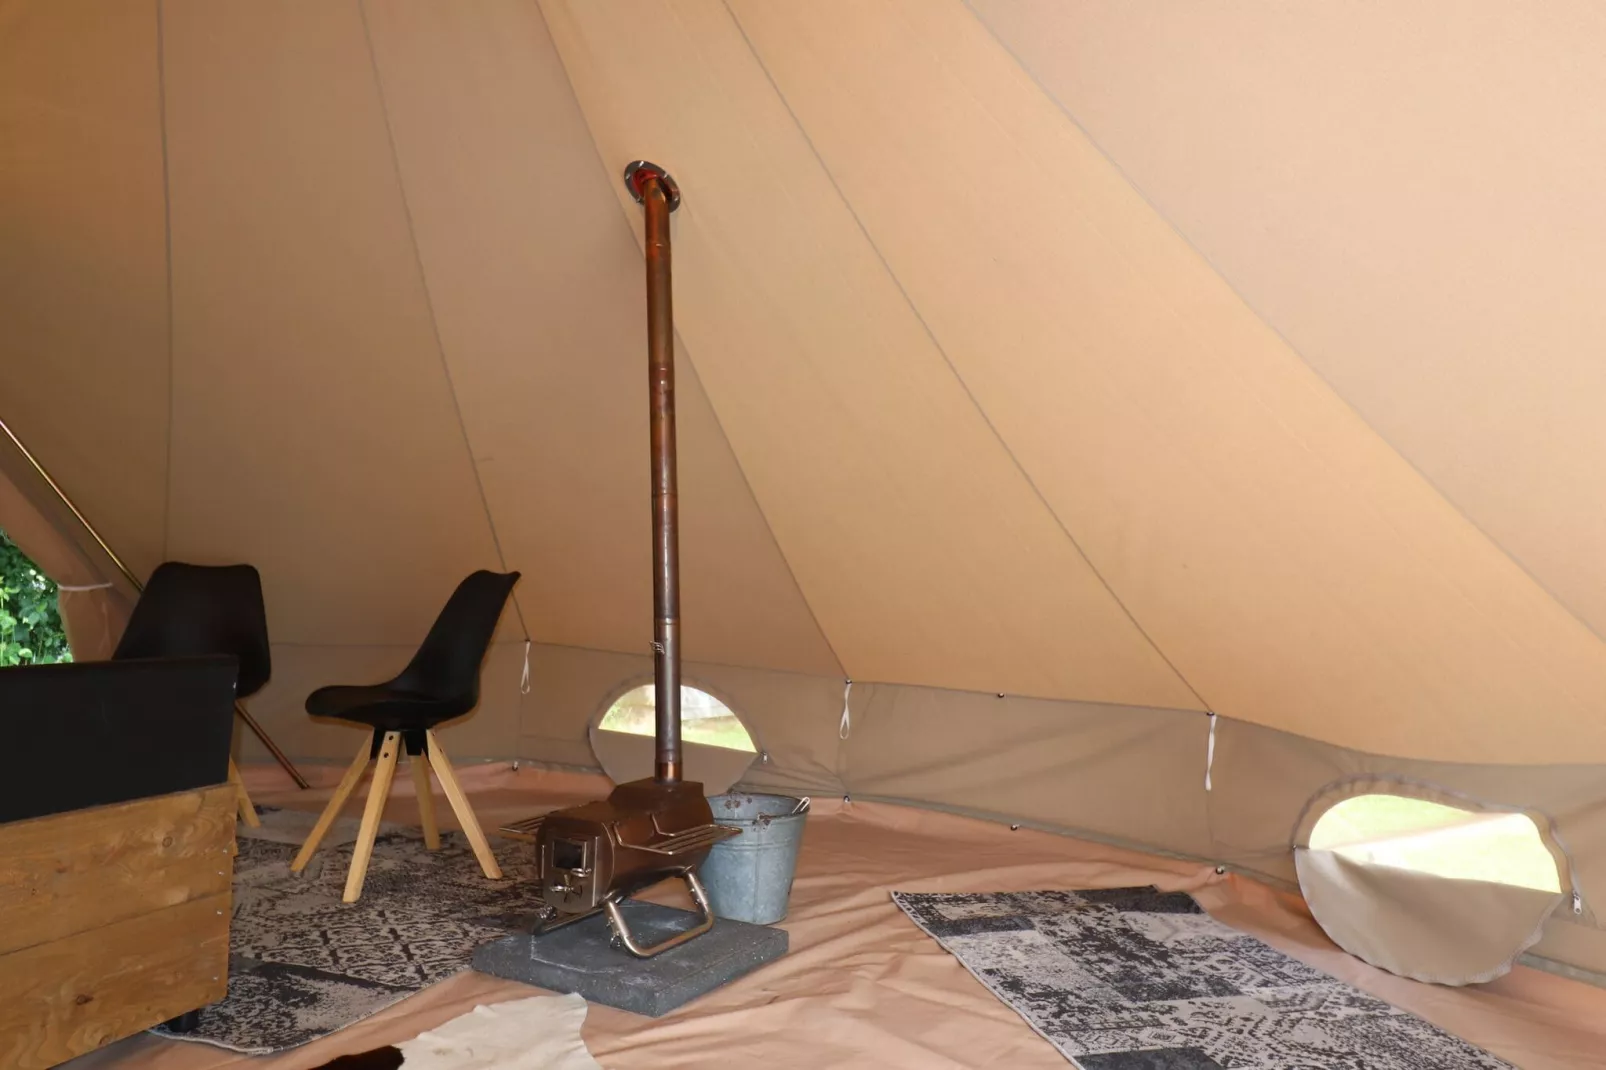 Glamour tent 'Smuk'-Woonkamer